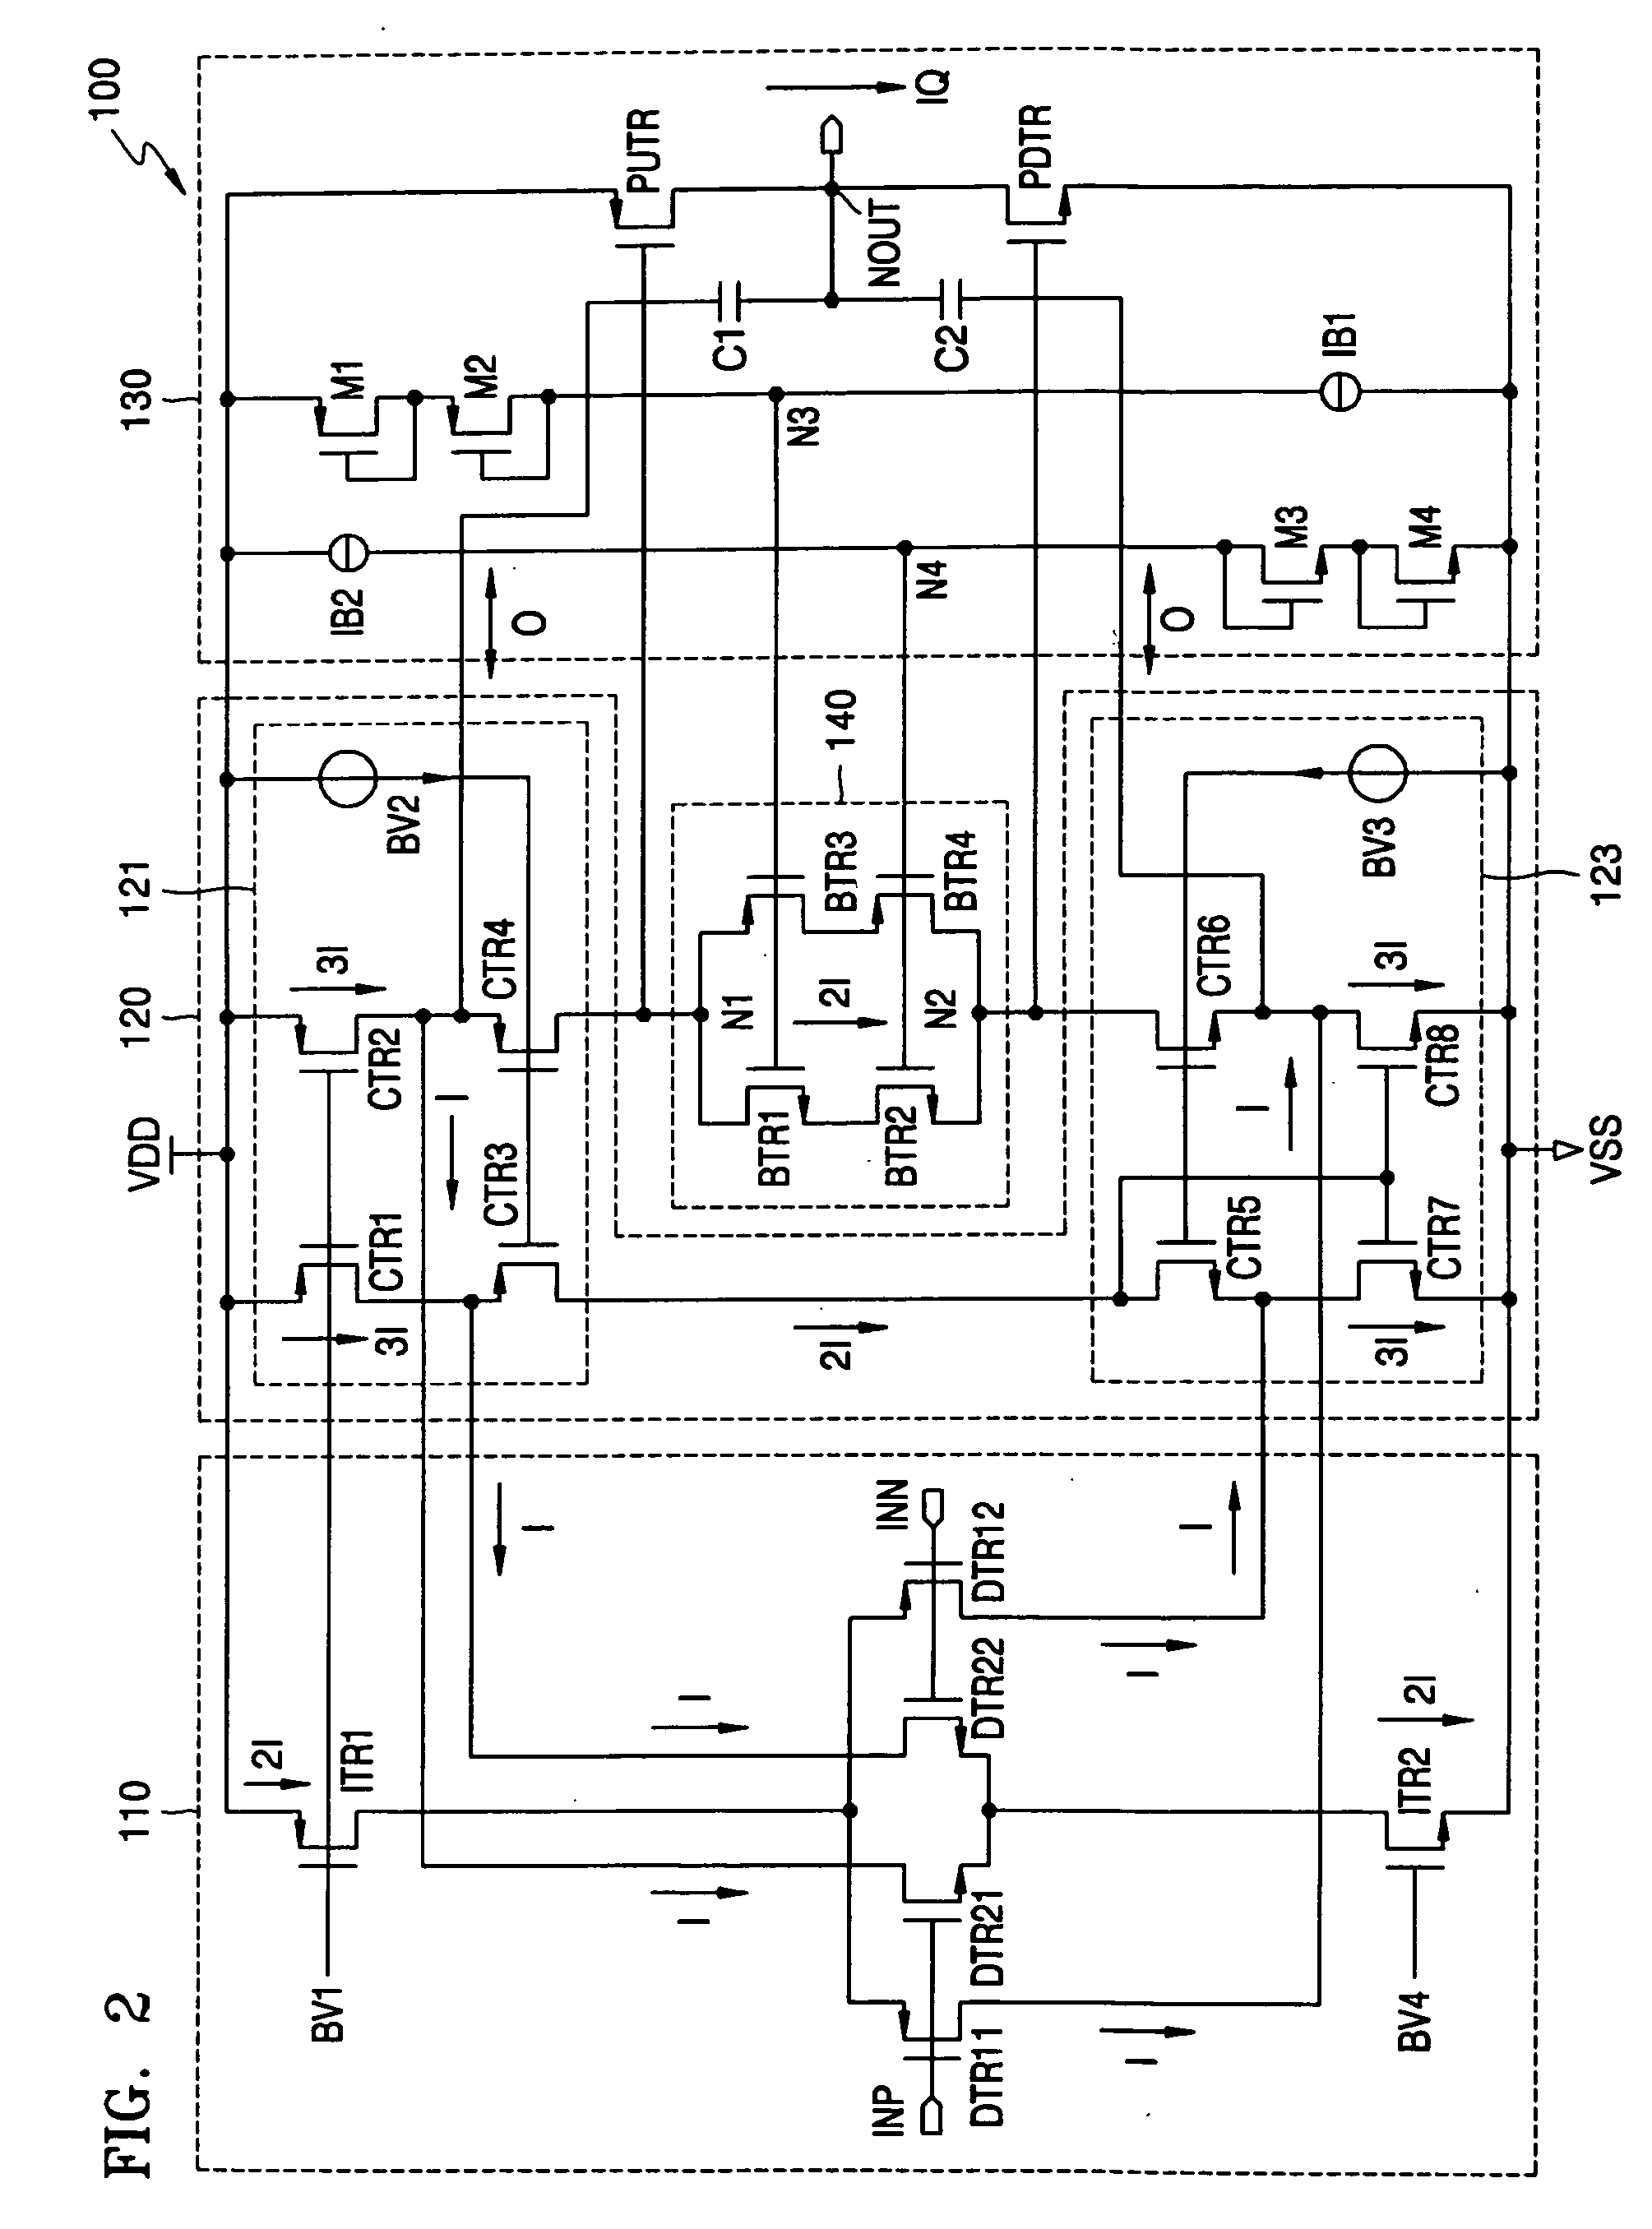 Differential amplifier with cascode control